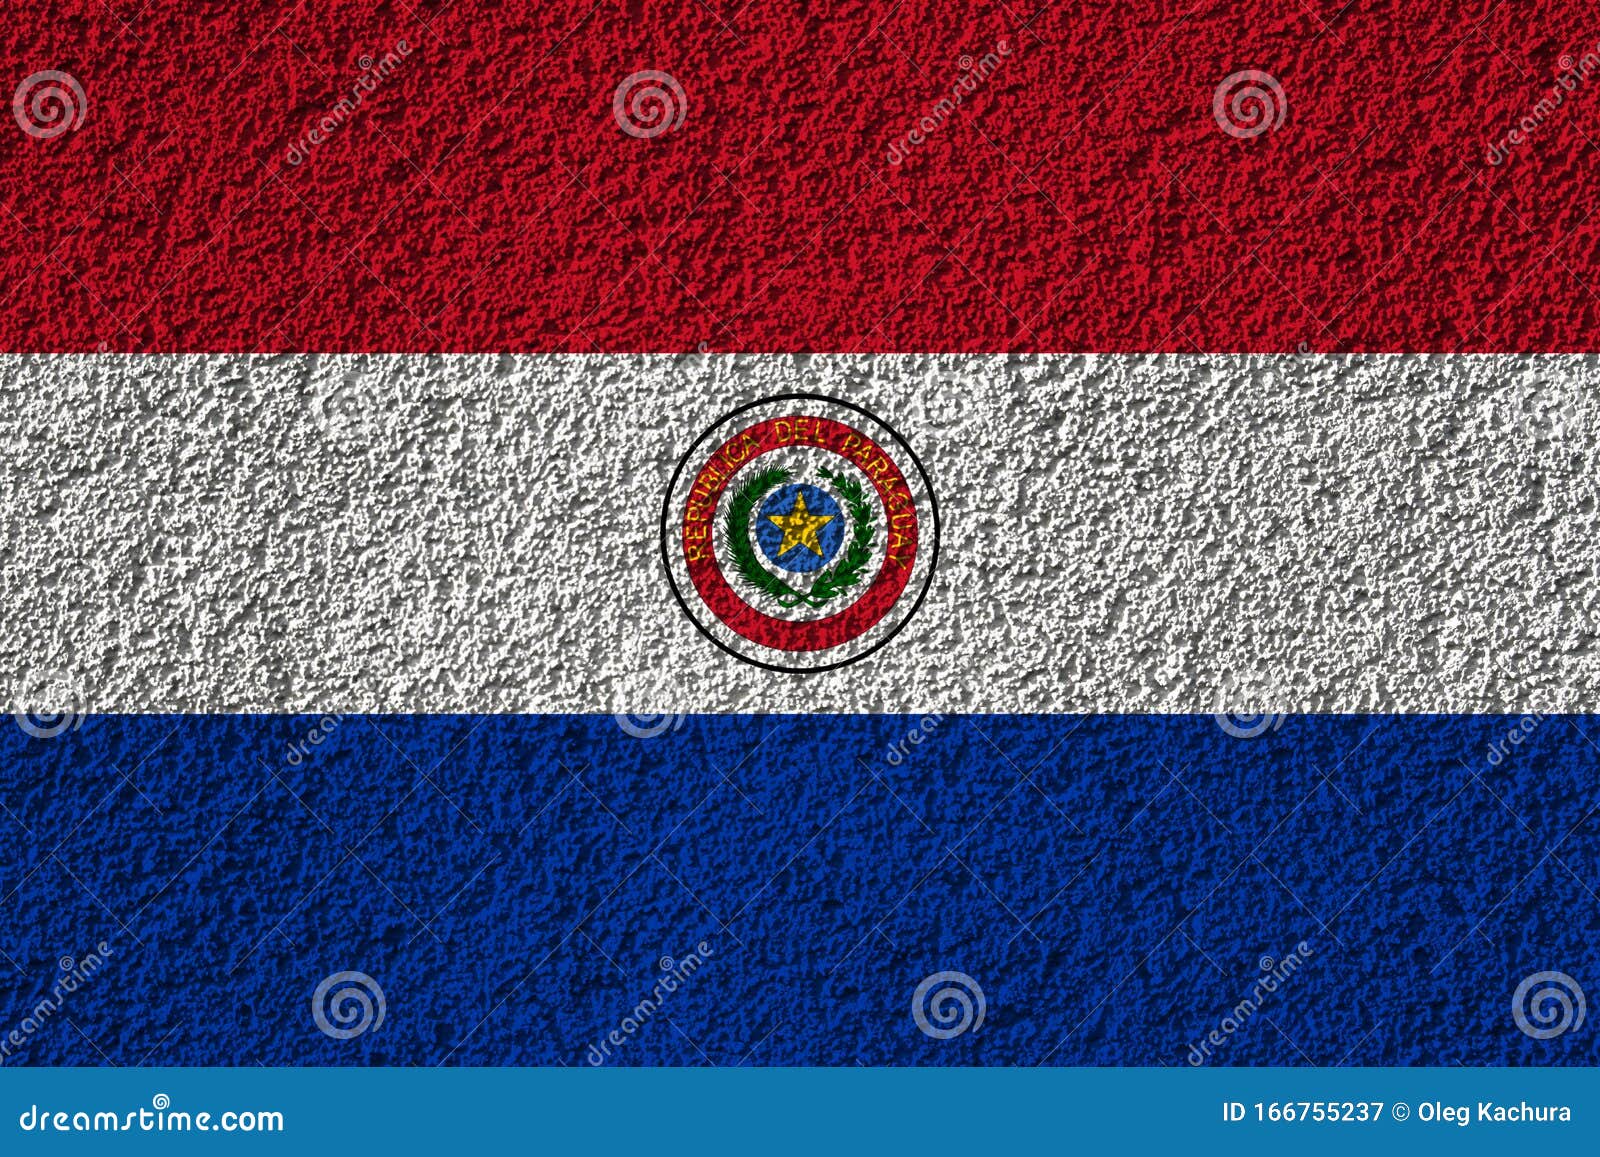 paraguai flag on the background texture. concept for er solutions